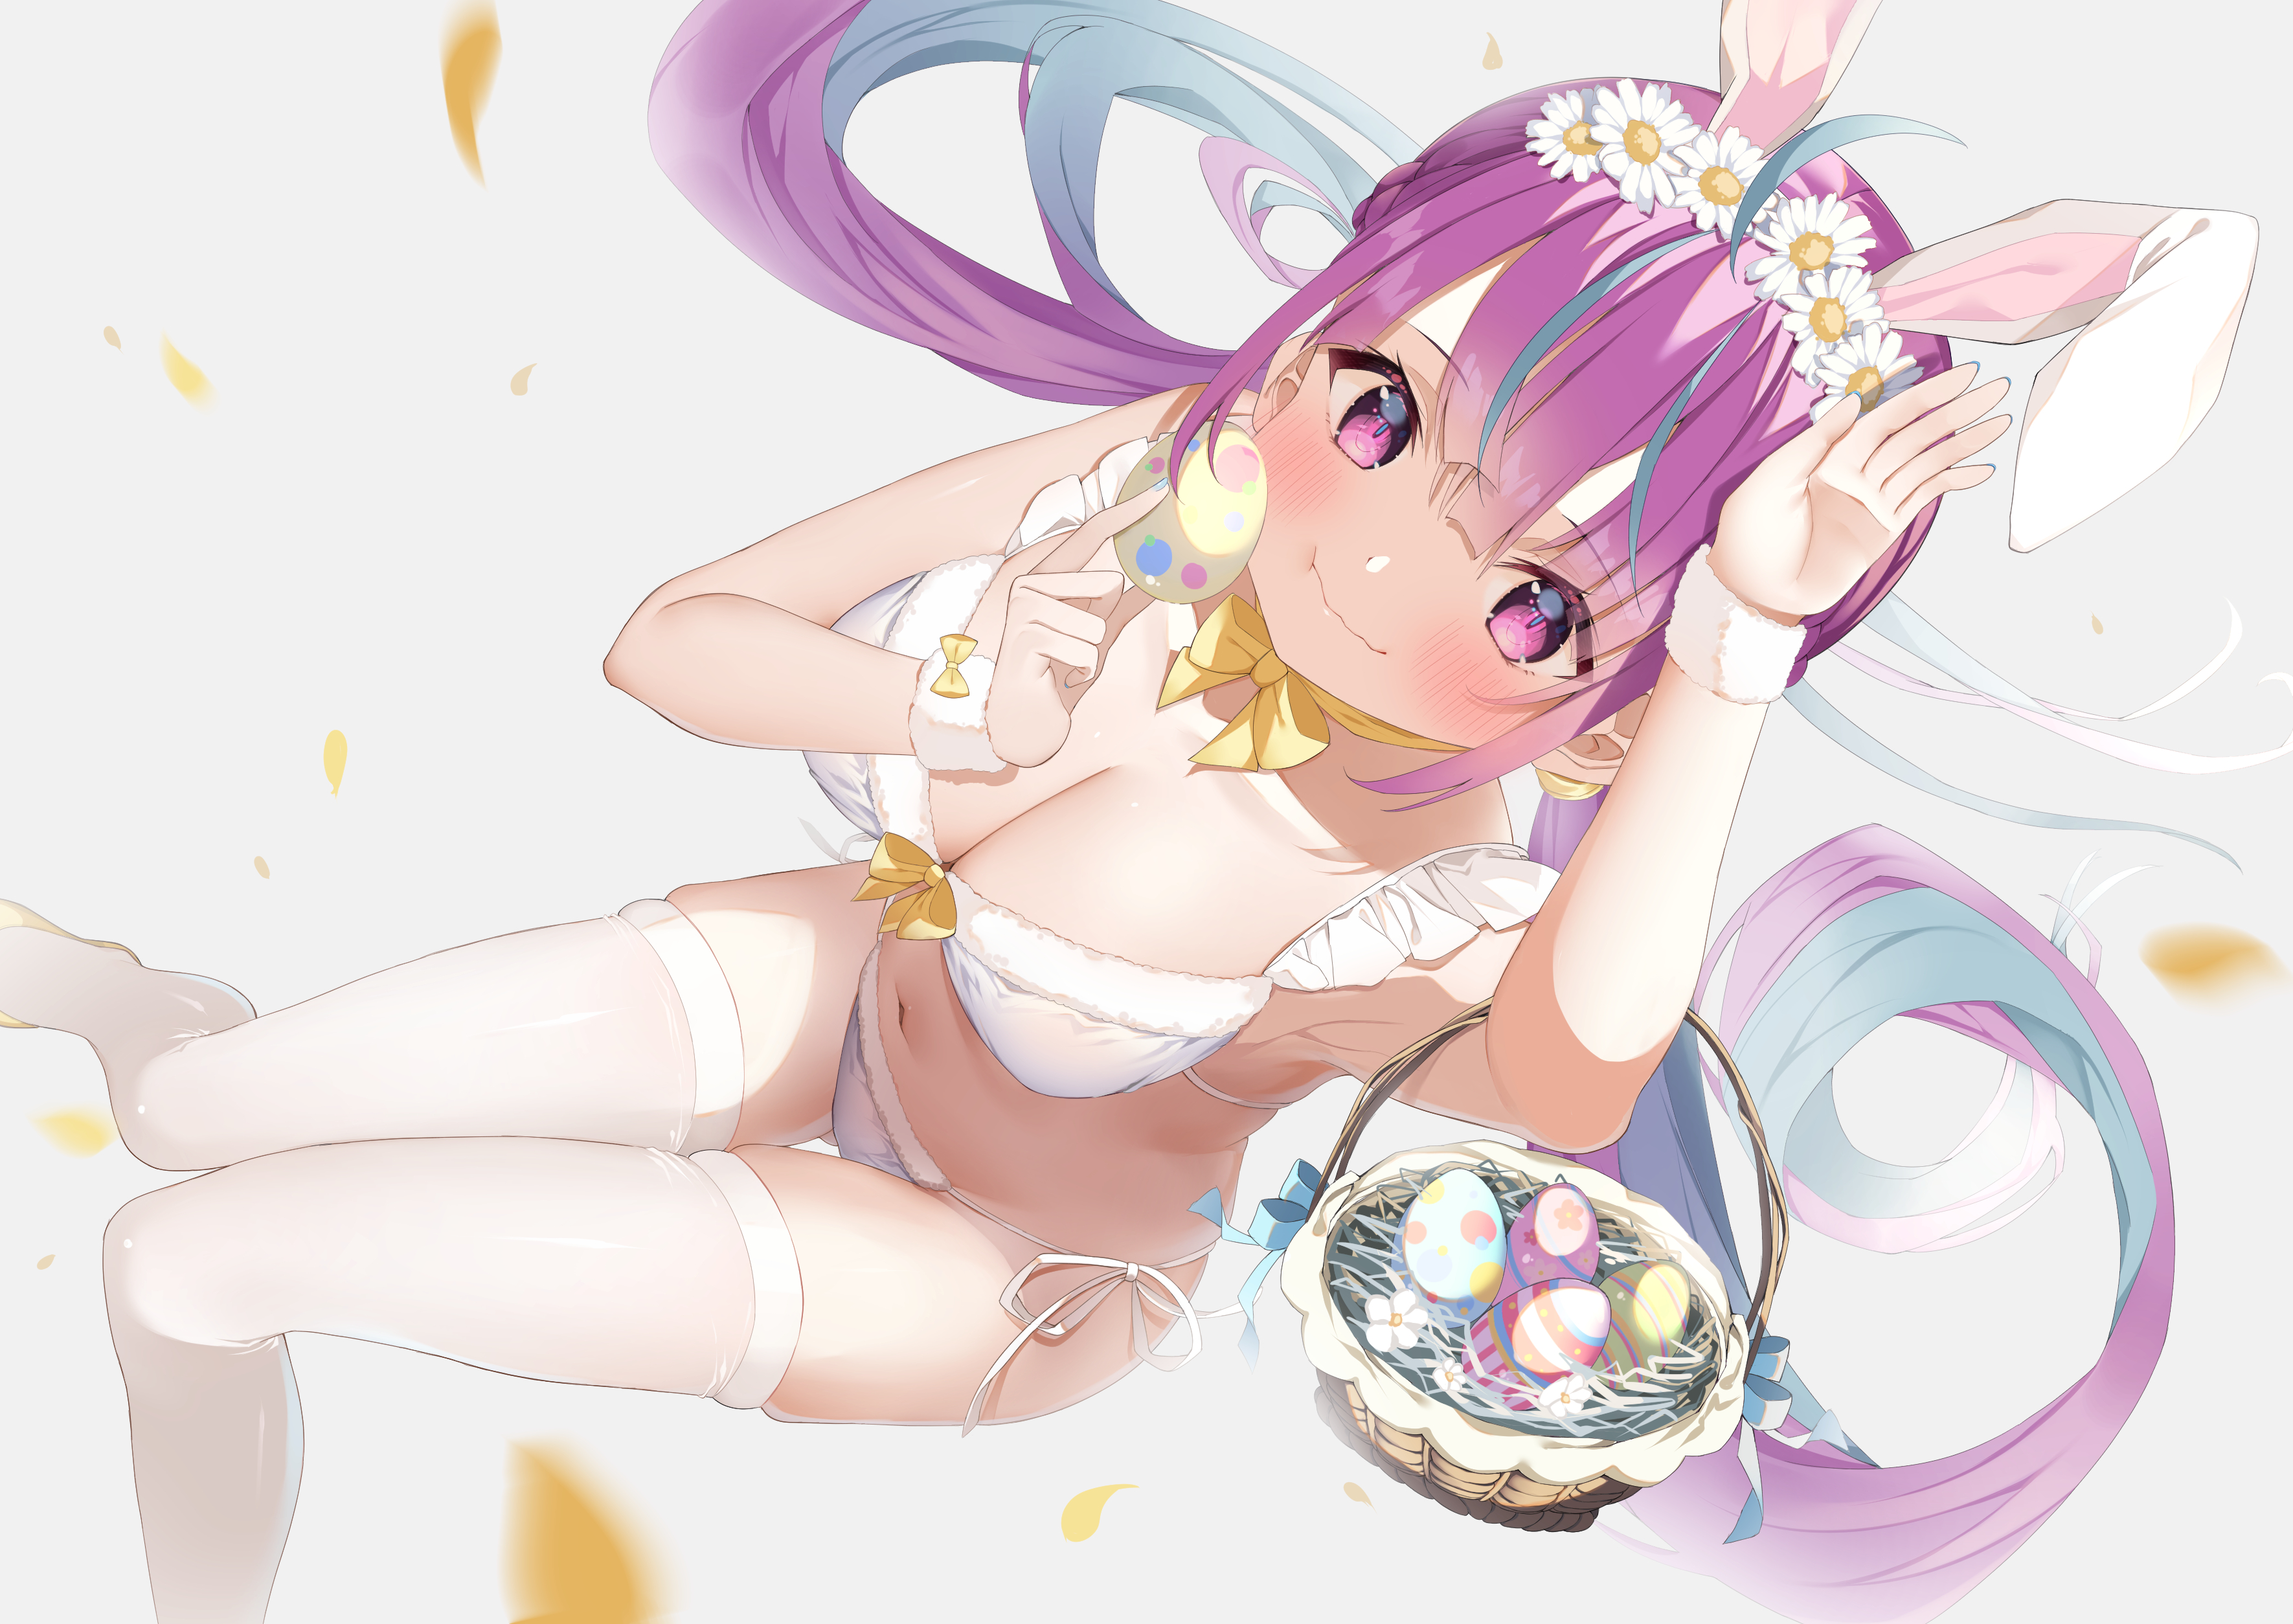 Anime 3541x2508 anime anime girls artwork Hololive Easter easter eggs bunny ears stockings white stockings underwear big boobs cleavage multi-colored hair white background